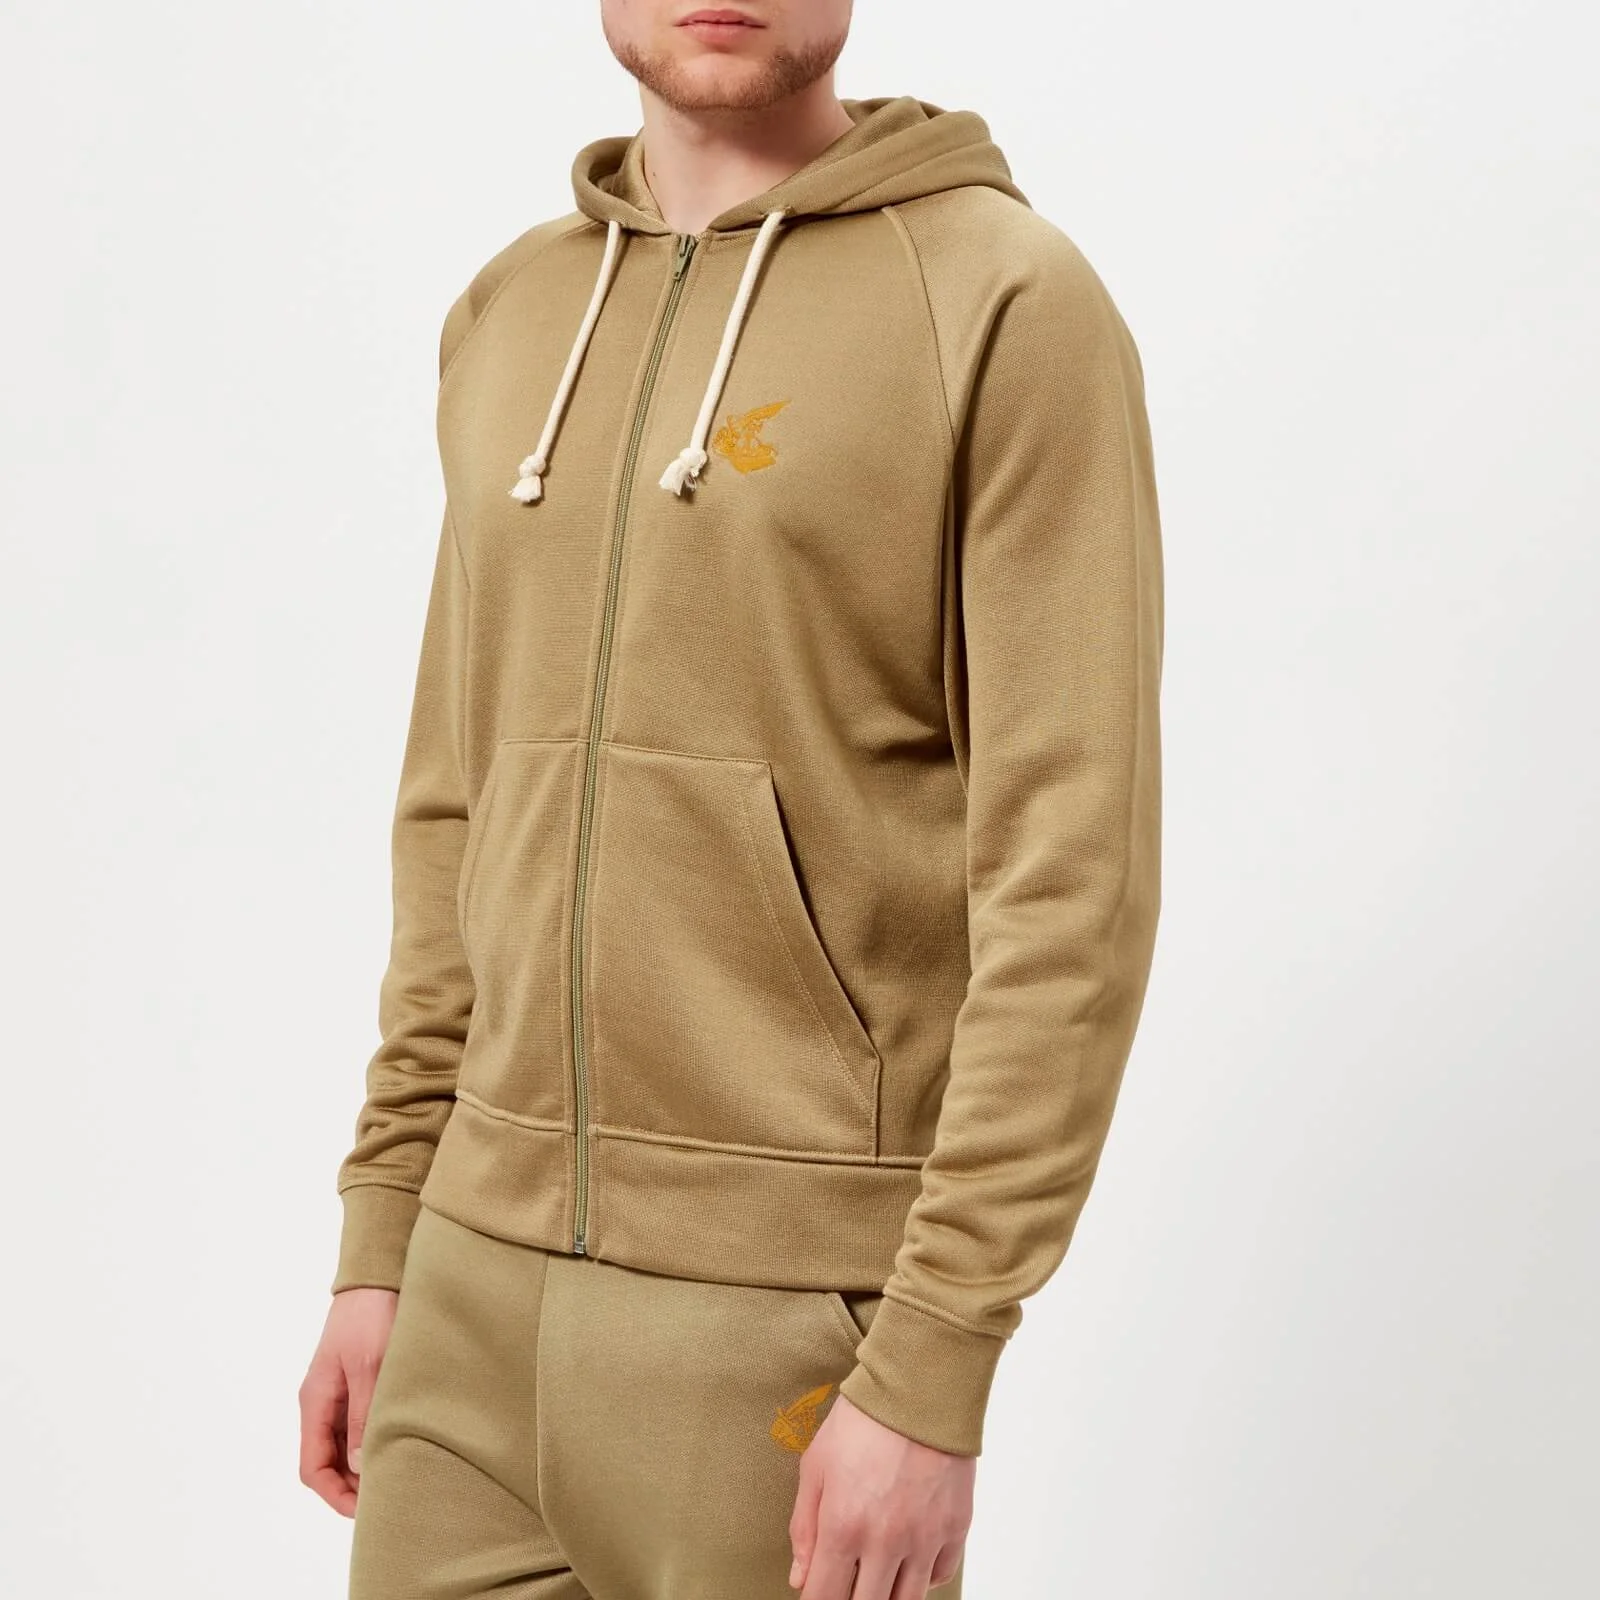 Vivienne Westwood Anglomania Men's Classic Tracksuit Top - Olive Image 1